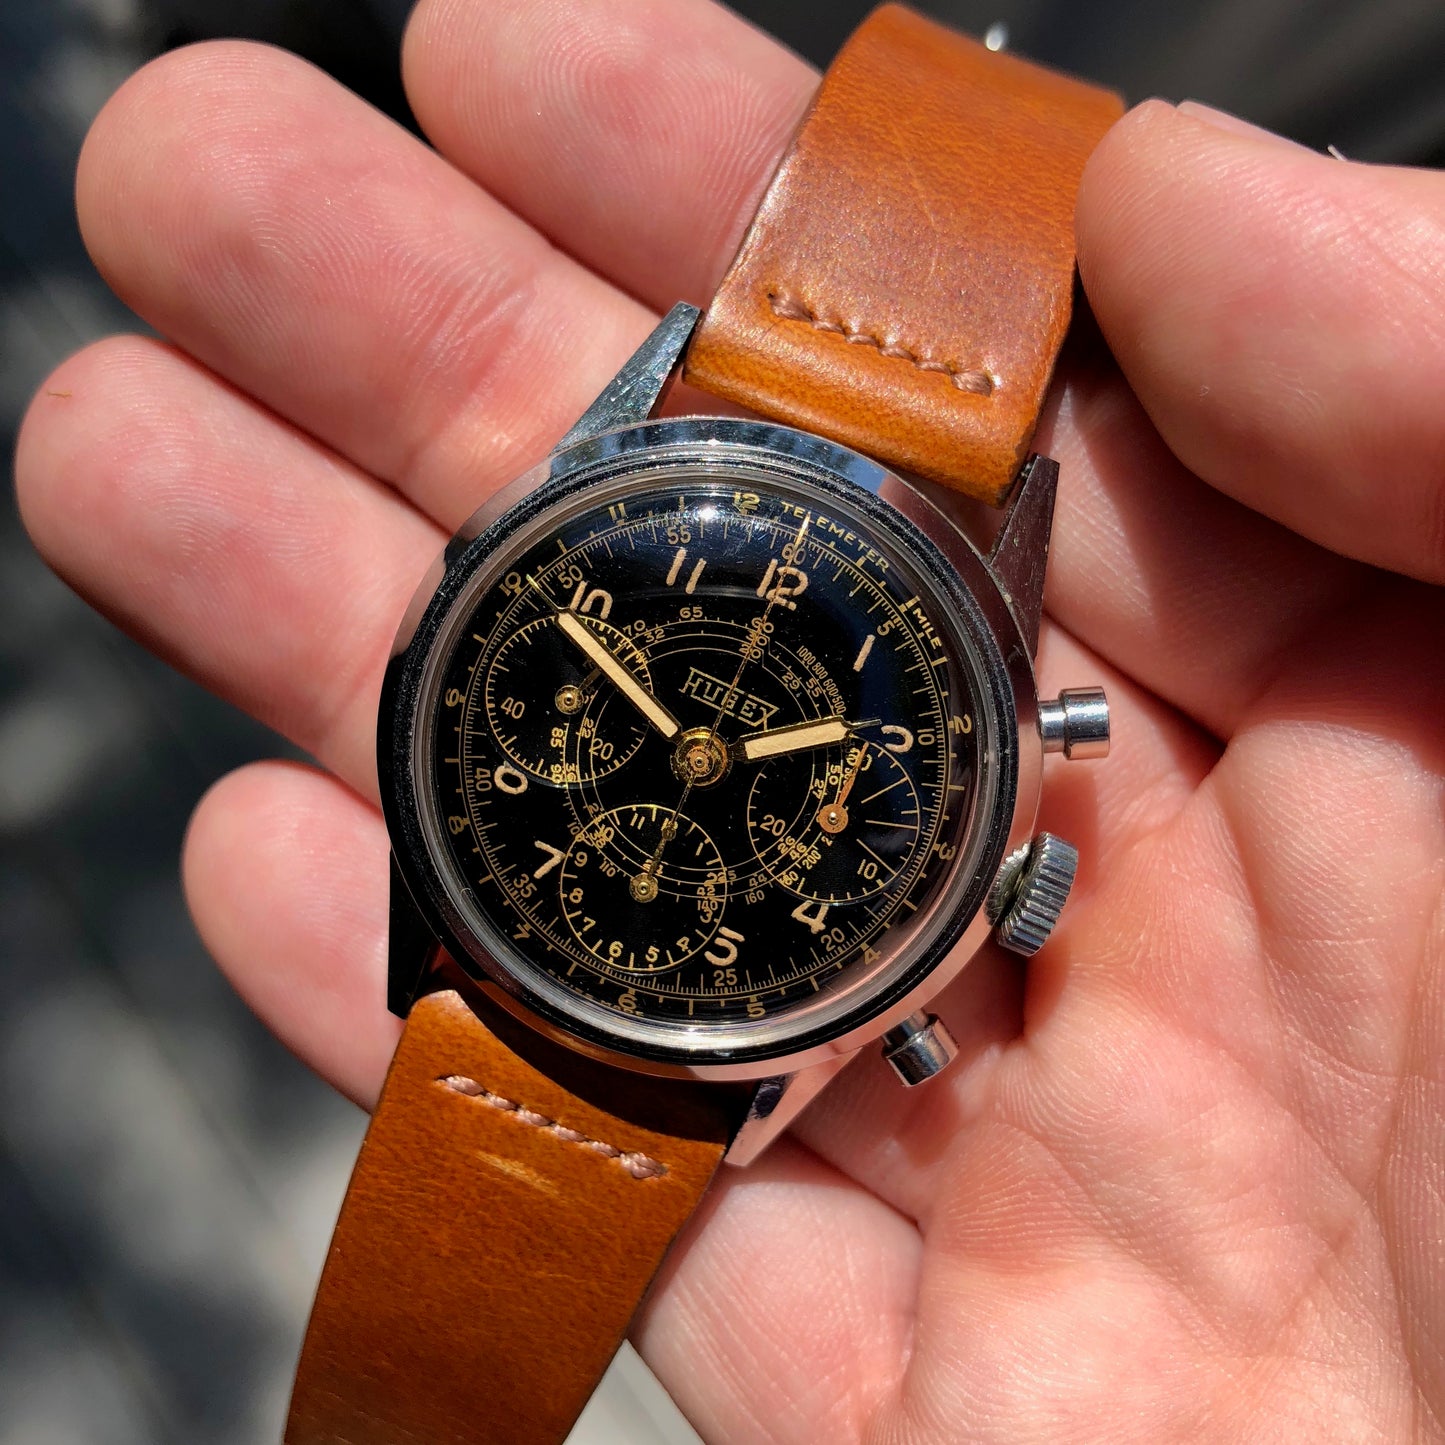 Vintage Hugex Stainless Steel Black Gilt Valjoux 72 Chronograph 37mm Wristwatch - Hashtag Watch Company